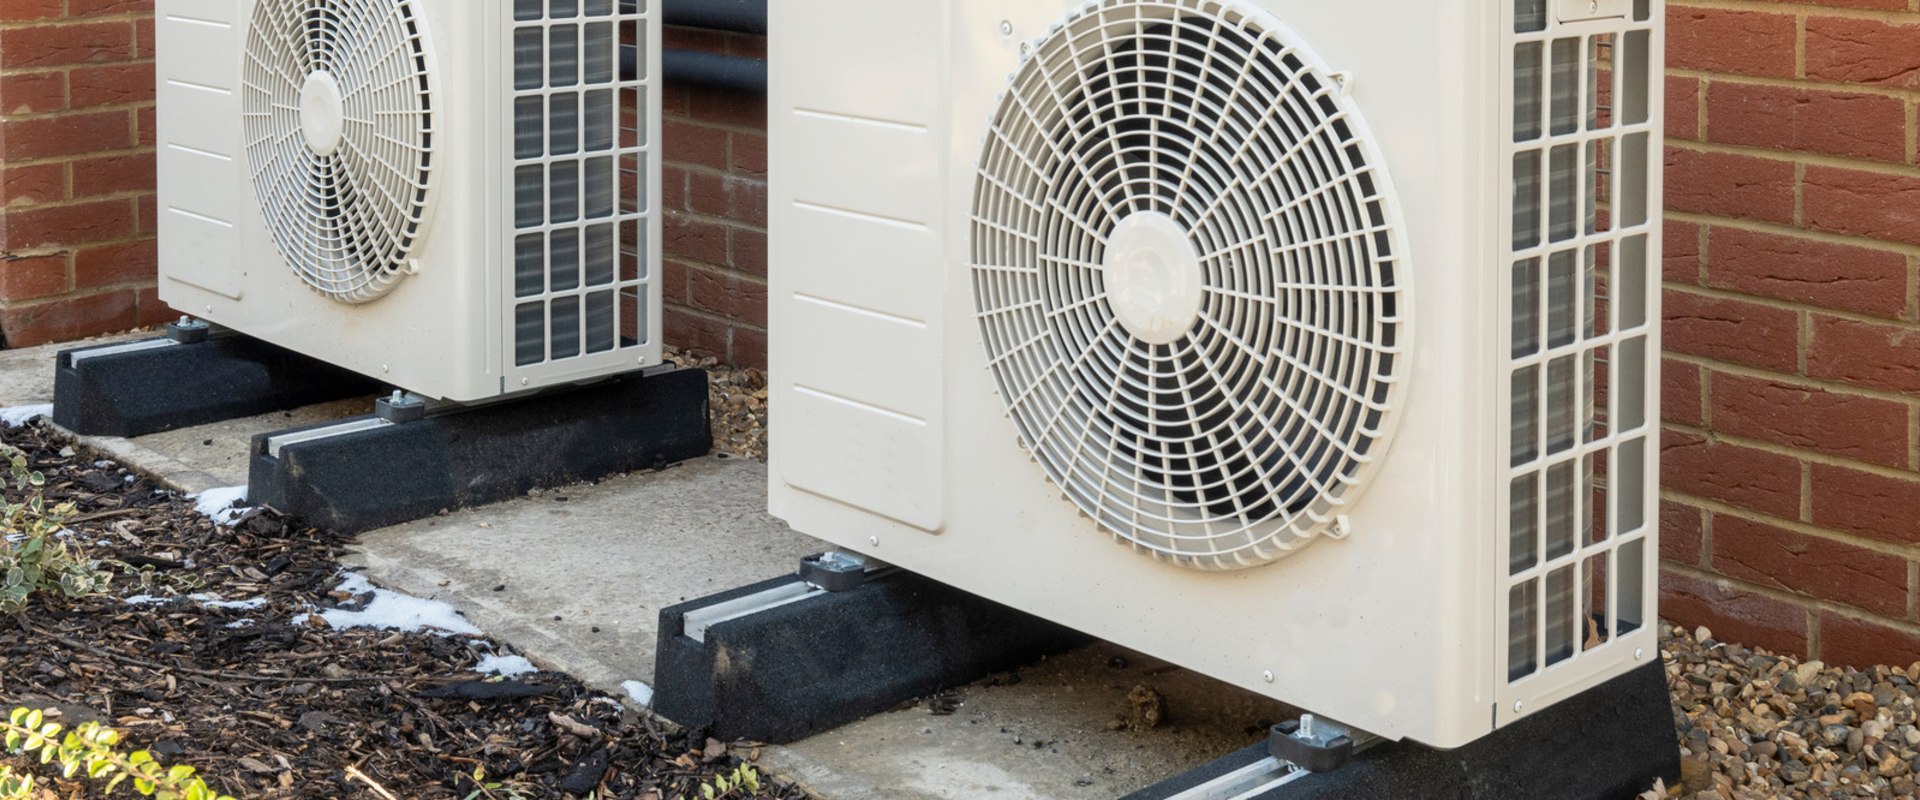 Is It Worth Replacing Your HVAC System? - An Expert's Perspective